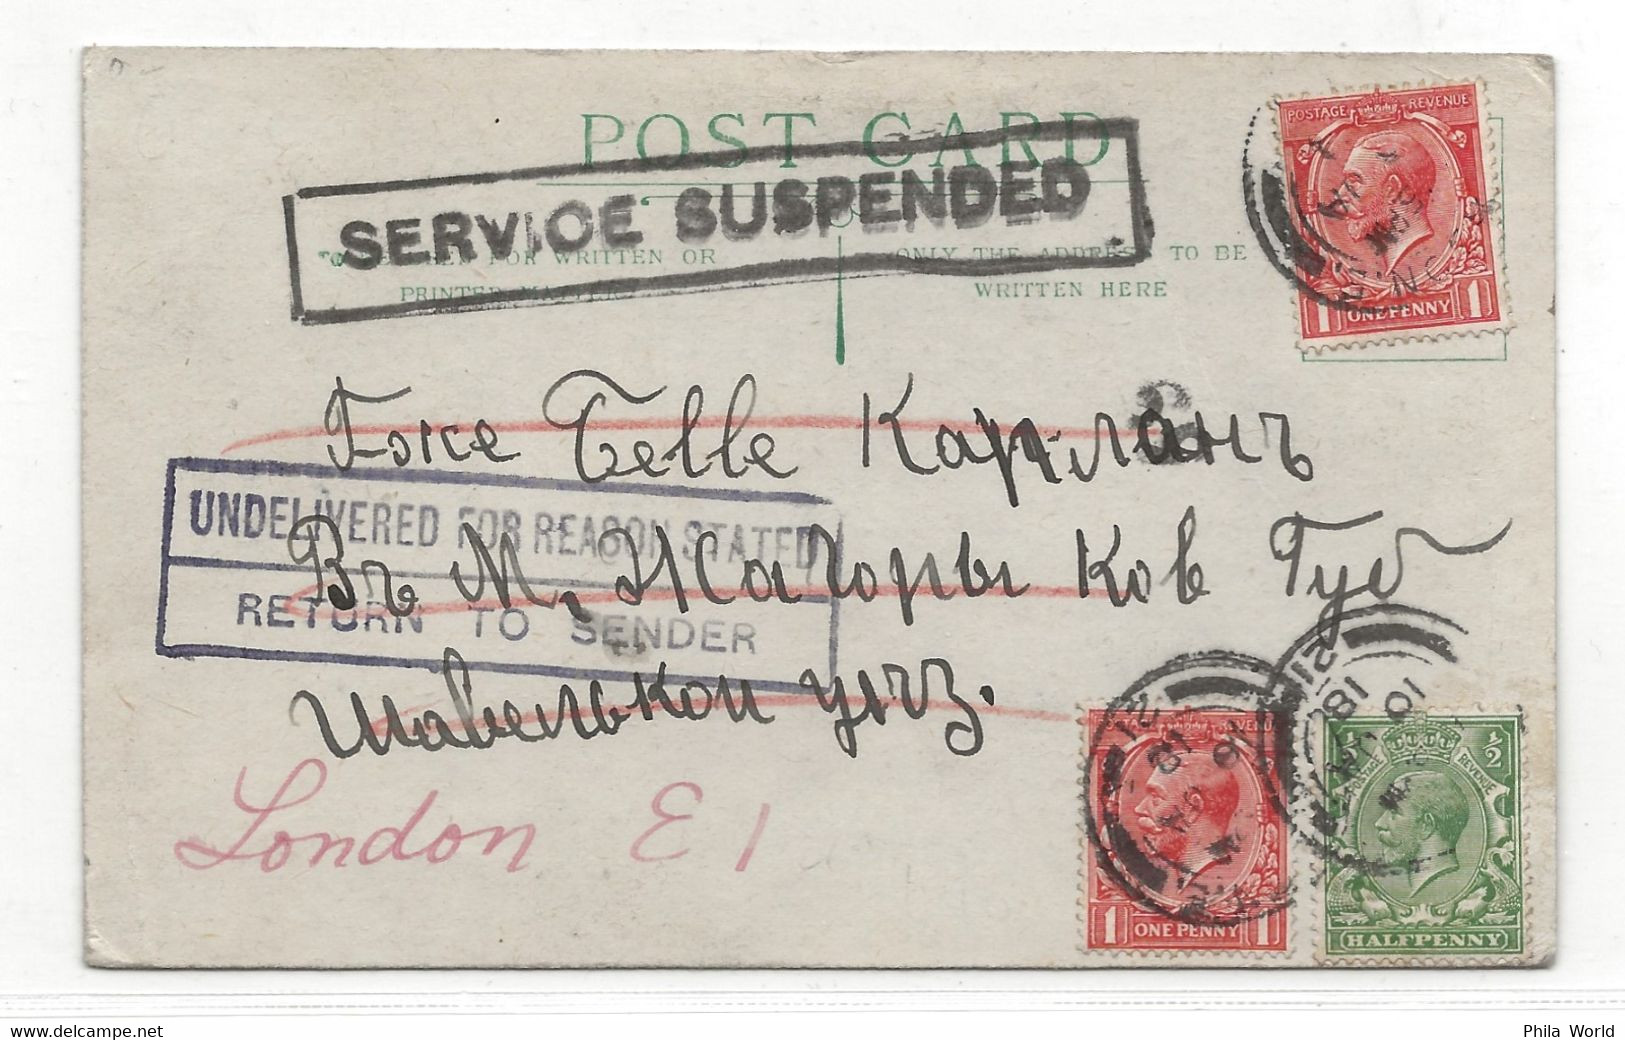 WW1 1918 GREAT BRITAIN London Postcard SERVICE SUSPENDED SUSPENDU Undelivered Reason Stated Return To Sender - Covers & Documents